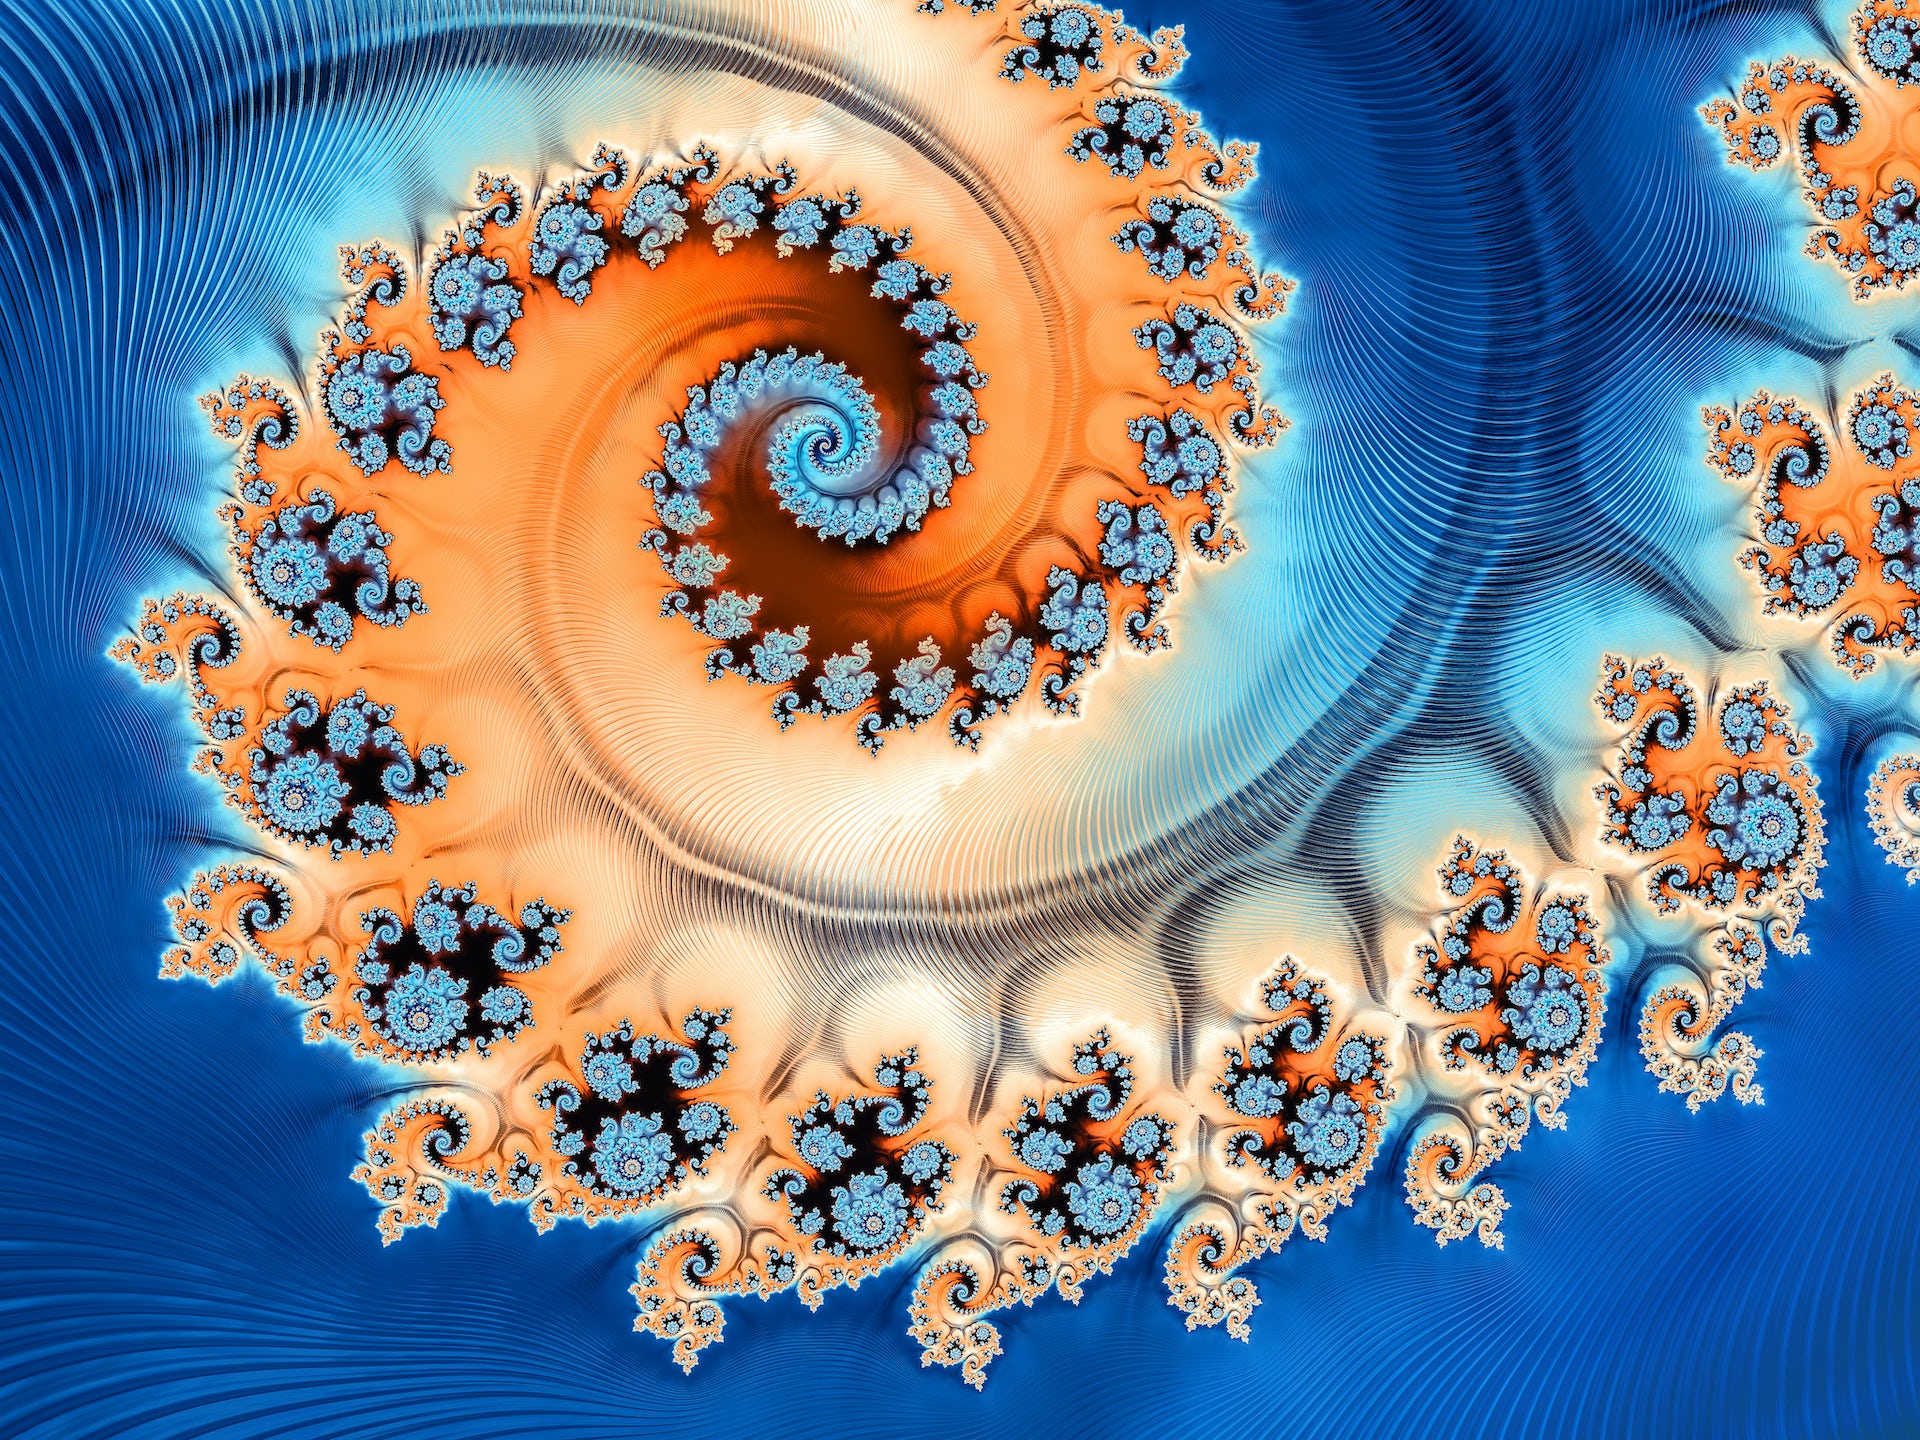 A bright blue and orange-gradient abstract spiraling fractal